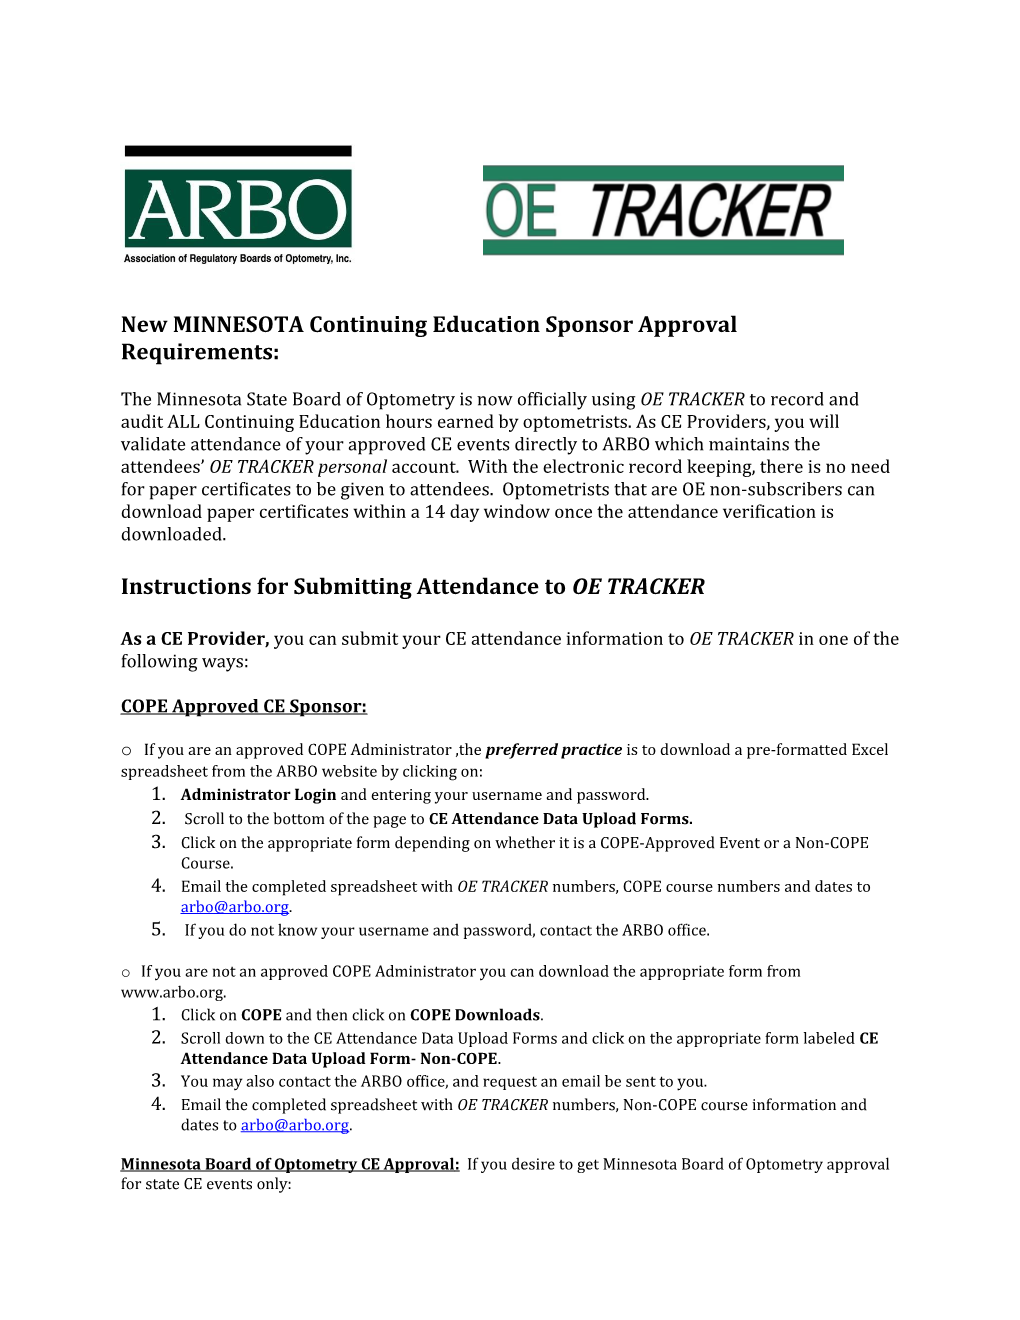 Newminnesota Continuing Education Sponsor Approval Requirements